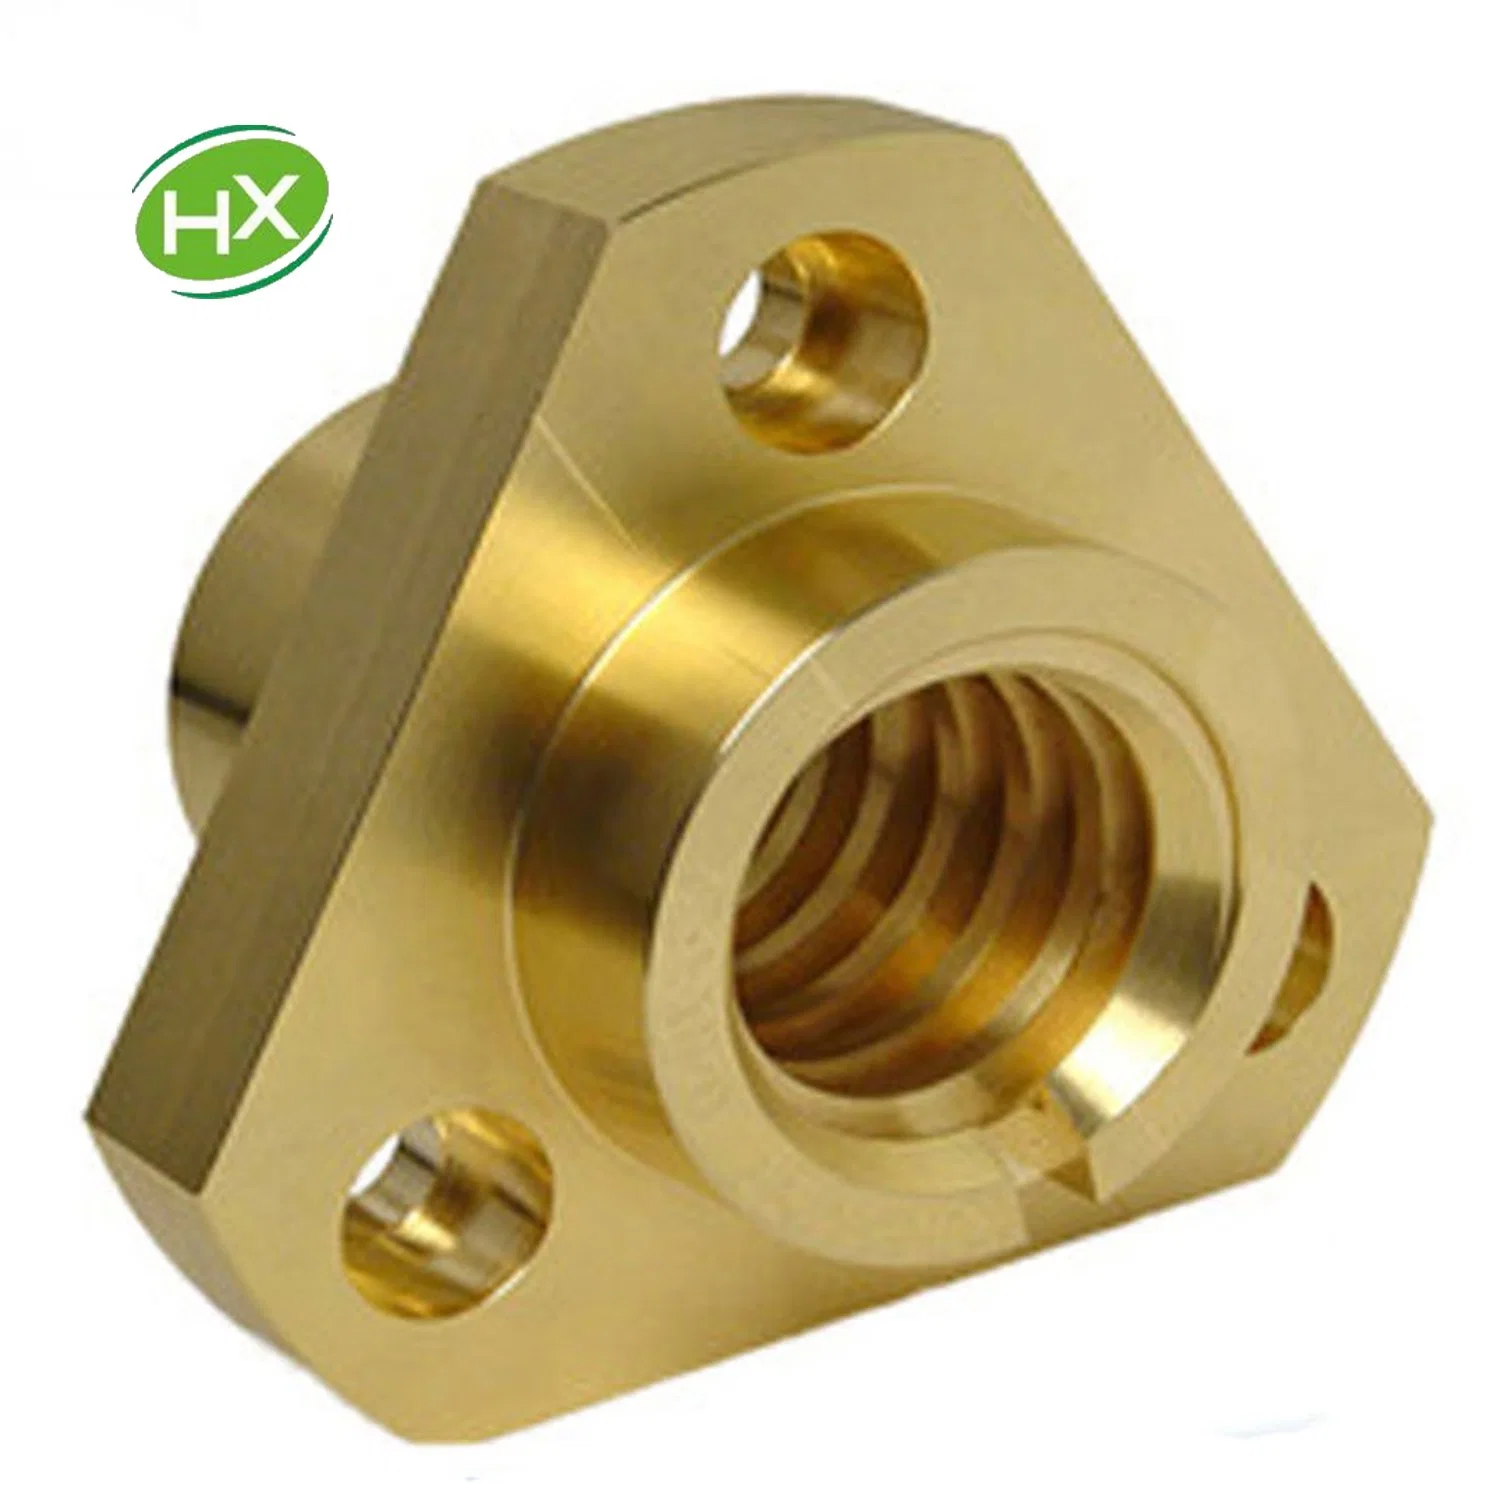 CNC Machining Brass/Copper for Casting Hardware Accessories/Motorcycle Parts